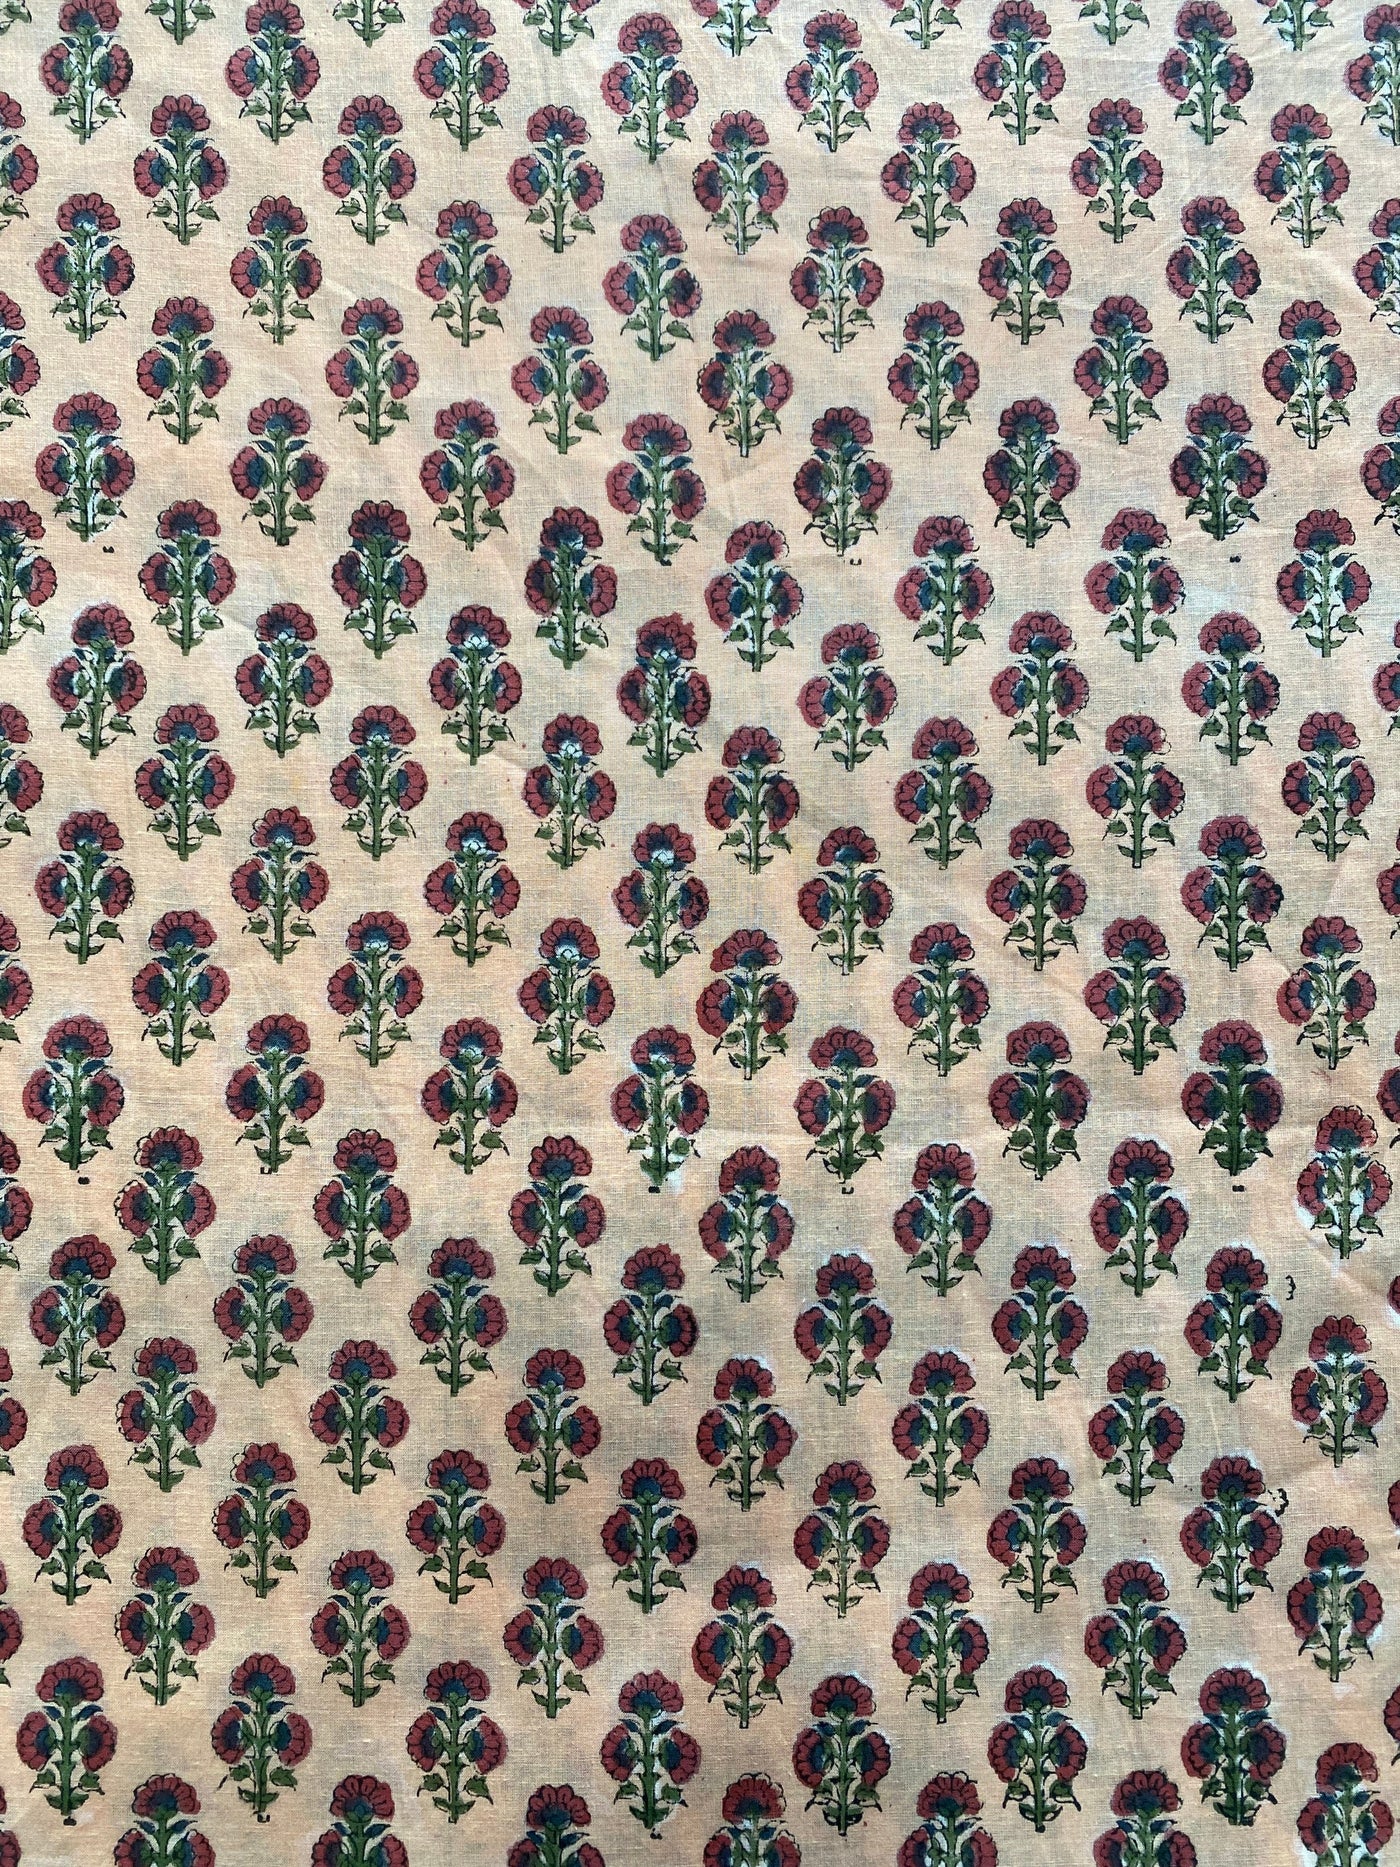 Penny Brown, Russian Green, Ecru Indian Floral Hand Block Printed 100% Pure Cotton Cloth, Fabric by the Yard, Dresses Curtains Pillow Covers